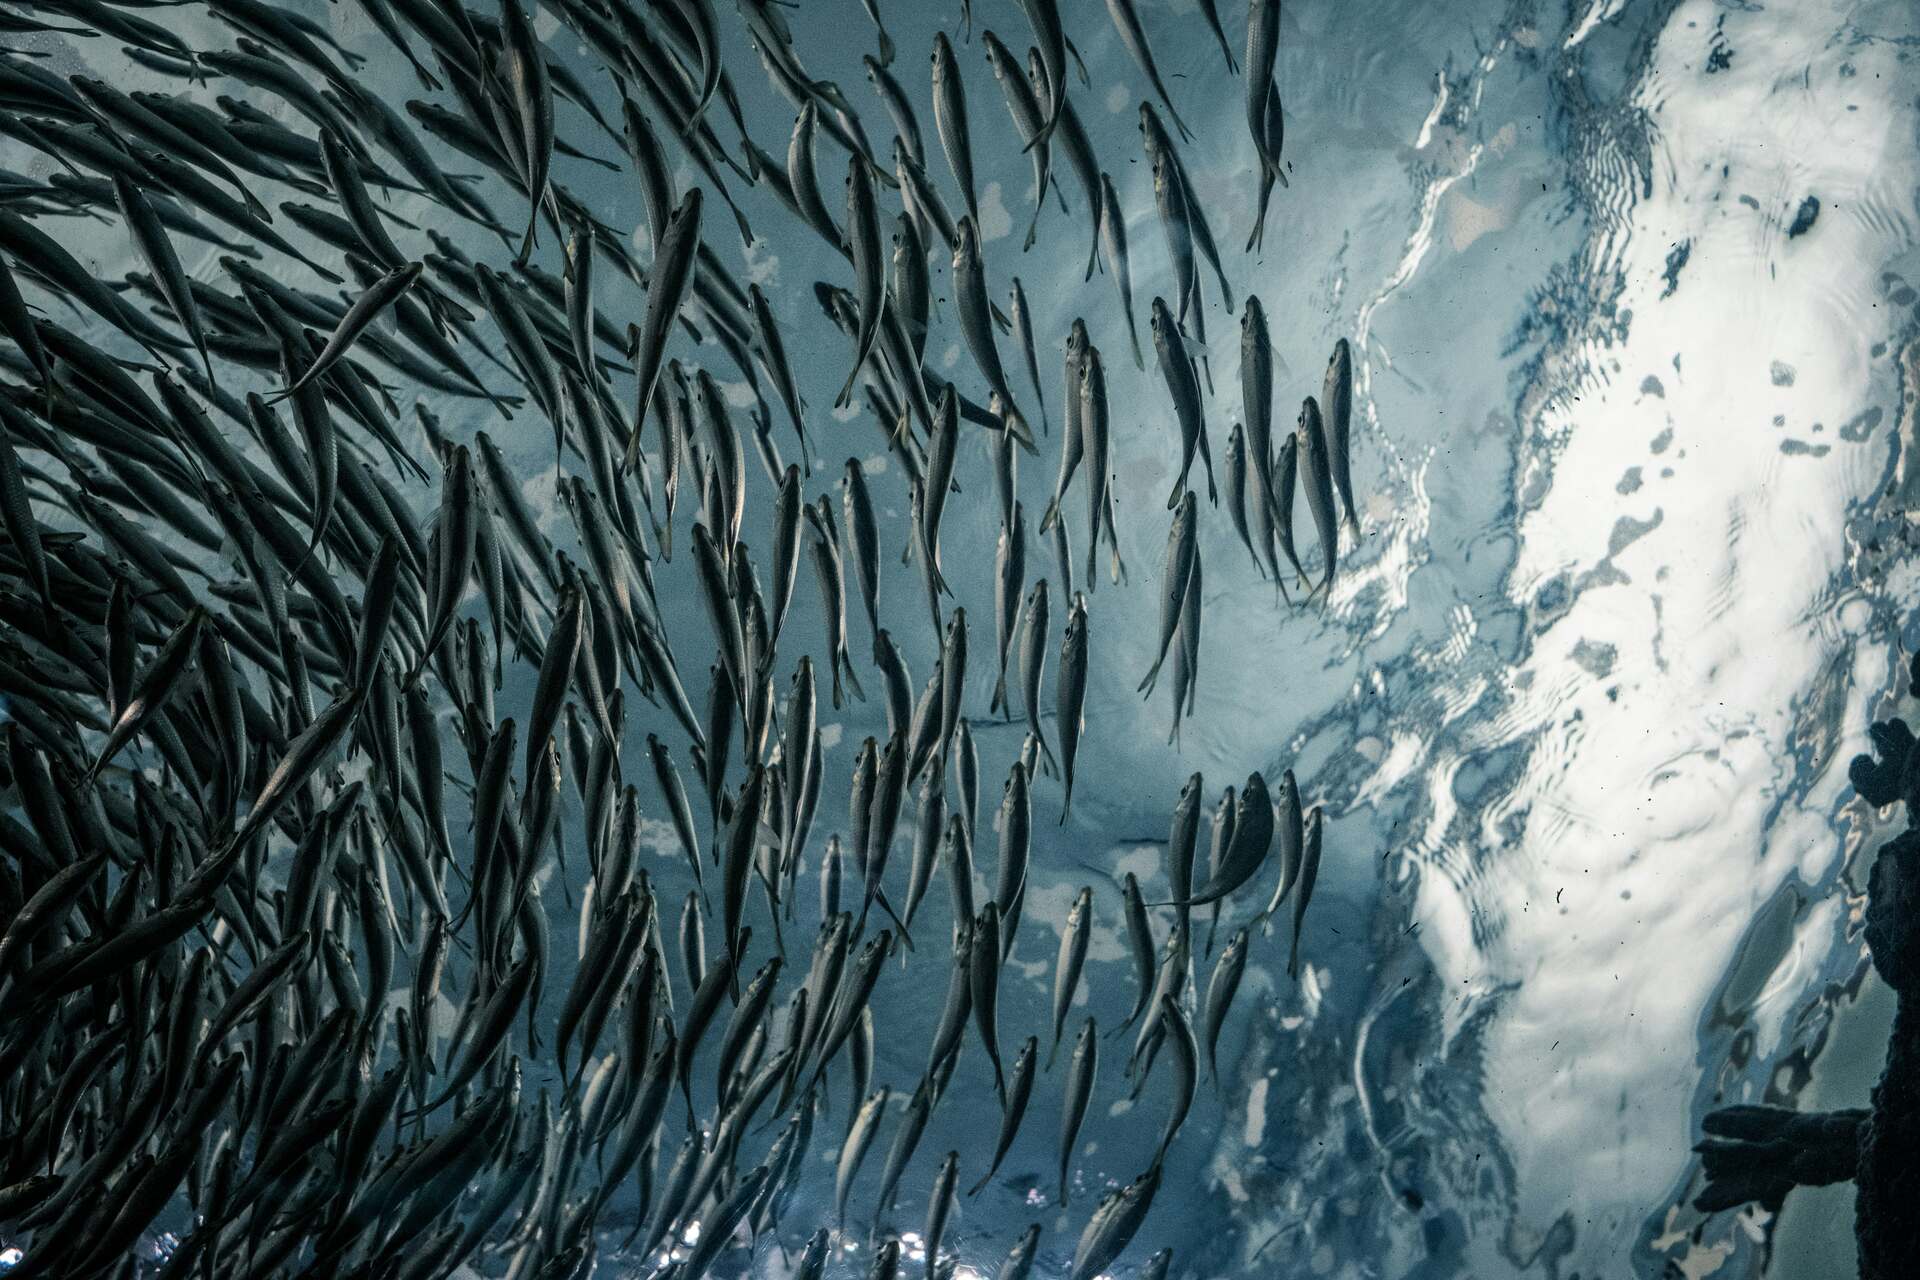 A school of sardines in the water